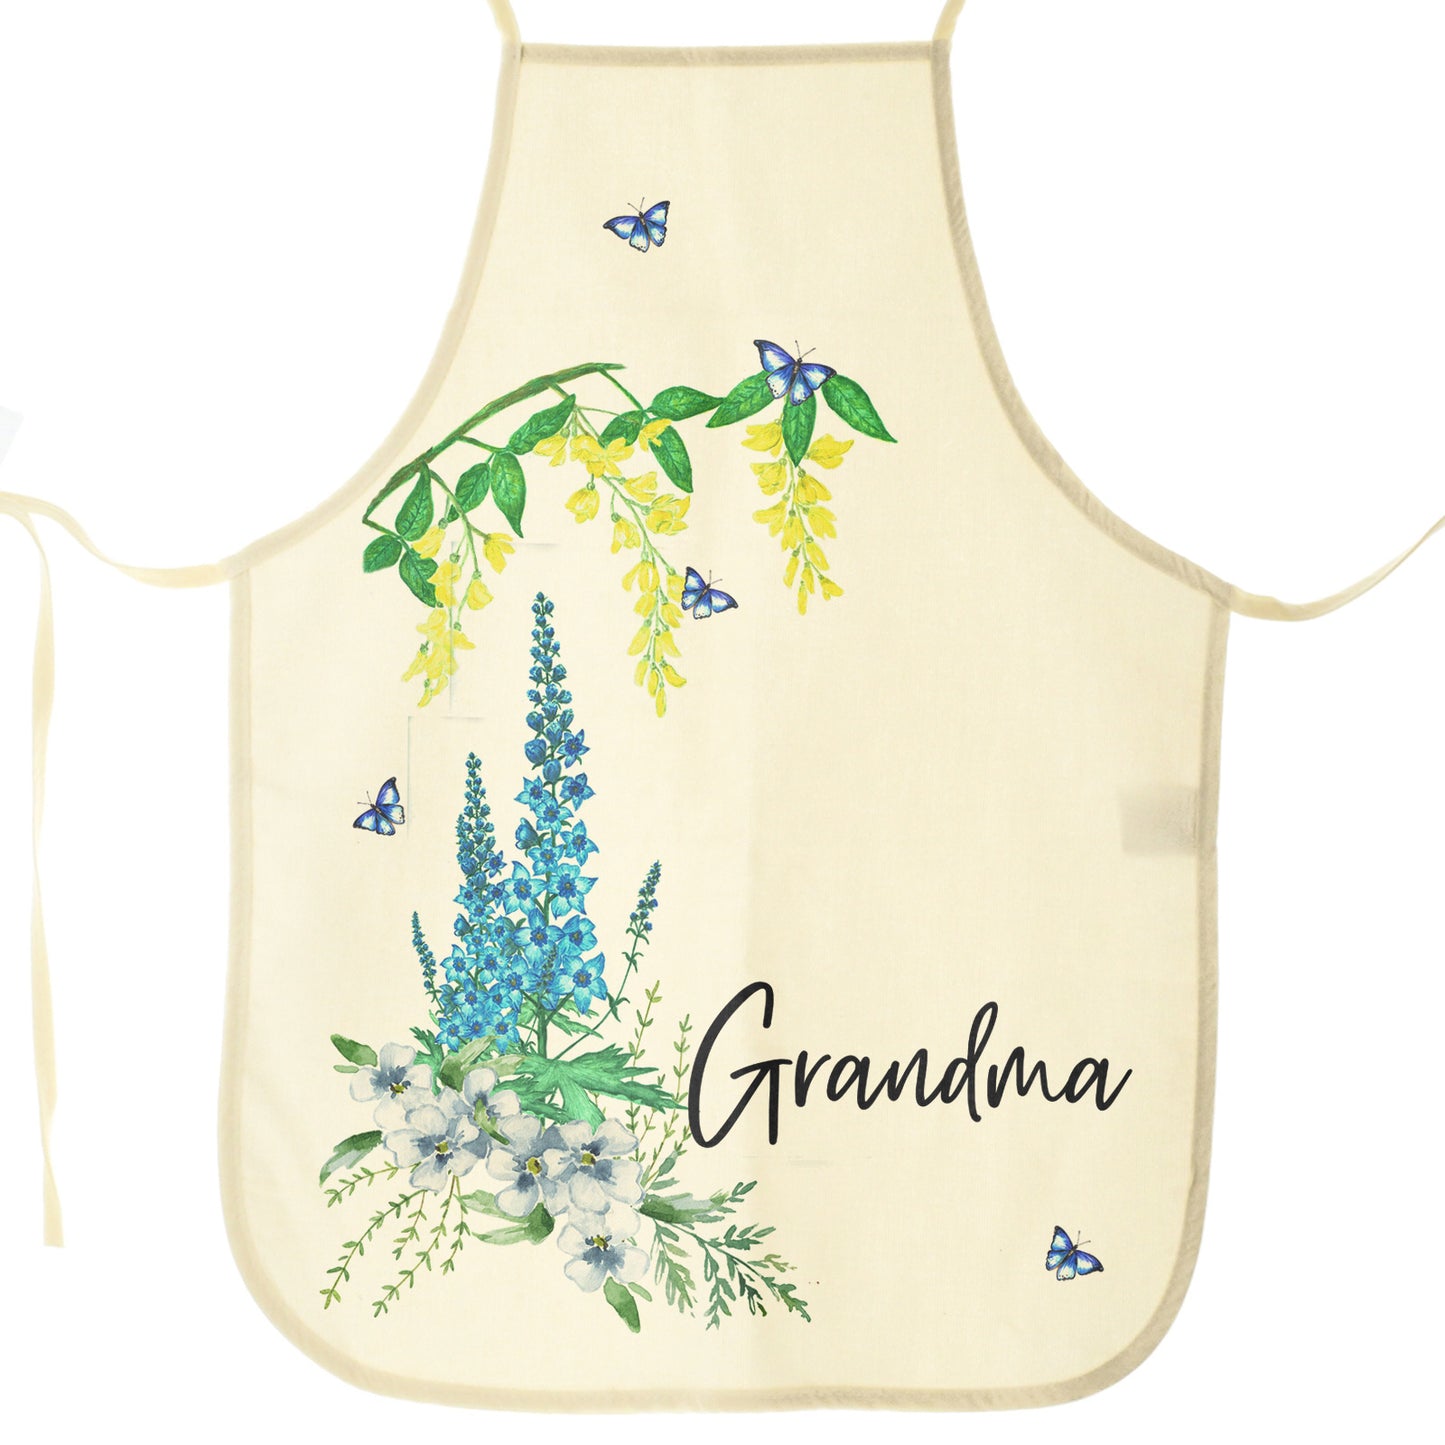 Personalised Apron with Stylish Text and Beautiful Garden Flowers Print